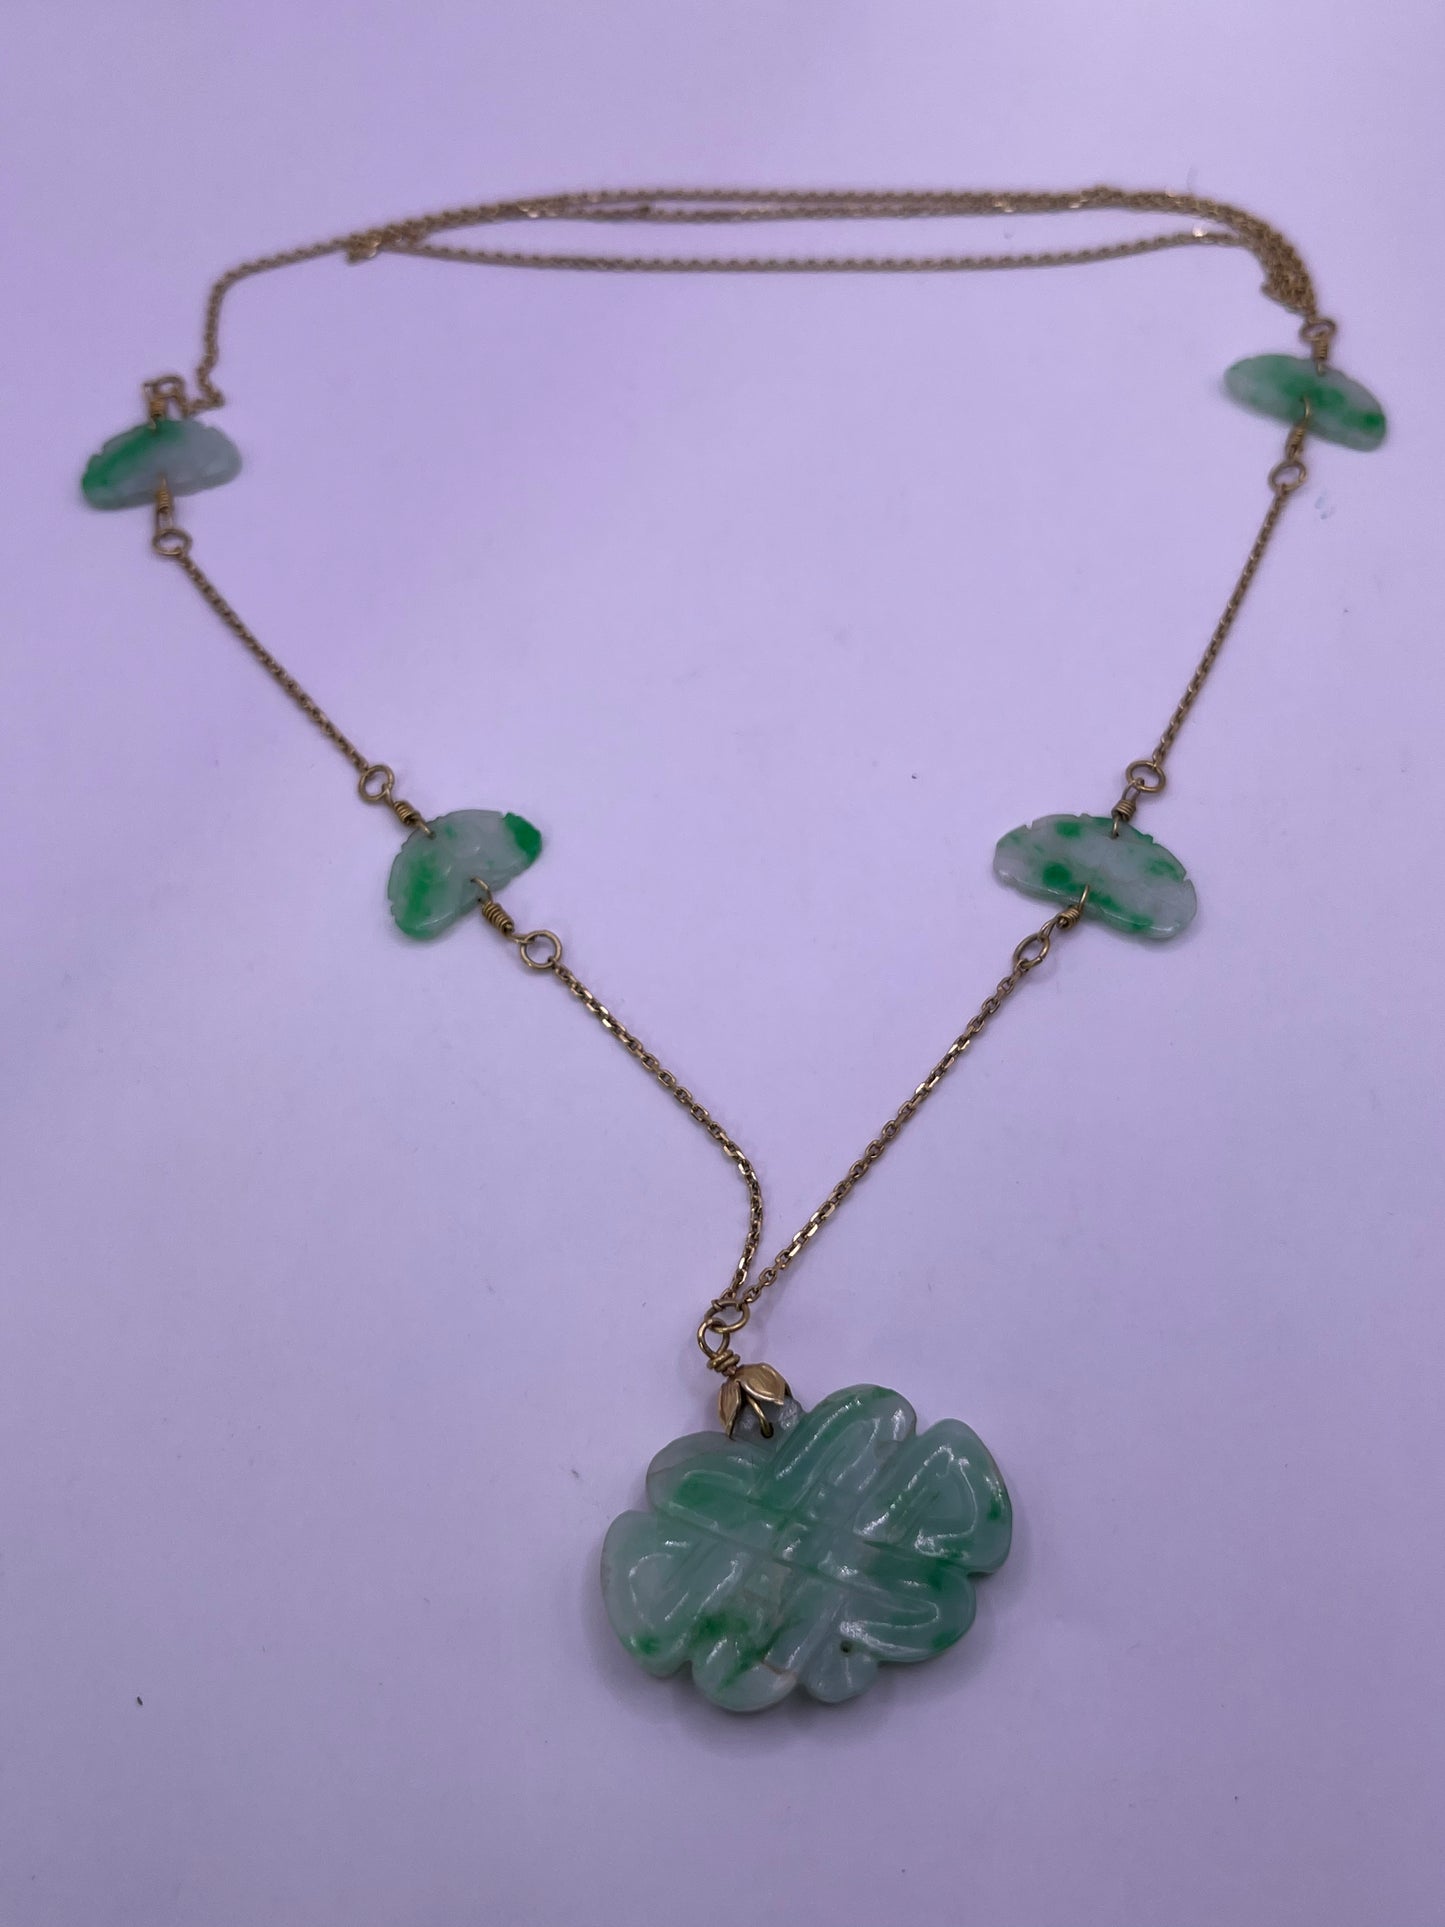 A vintage Art Deco style necklace with an antique apple green jade carved plaque and smaller plaques on 14kt chain